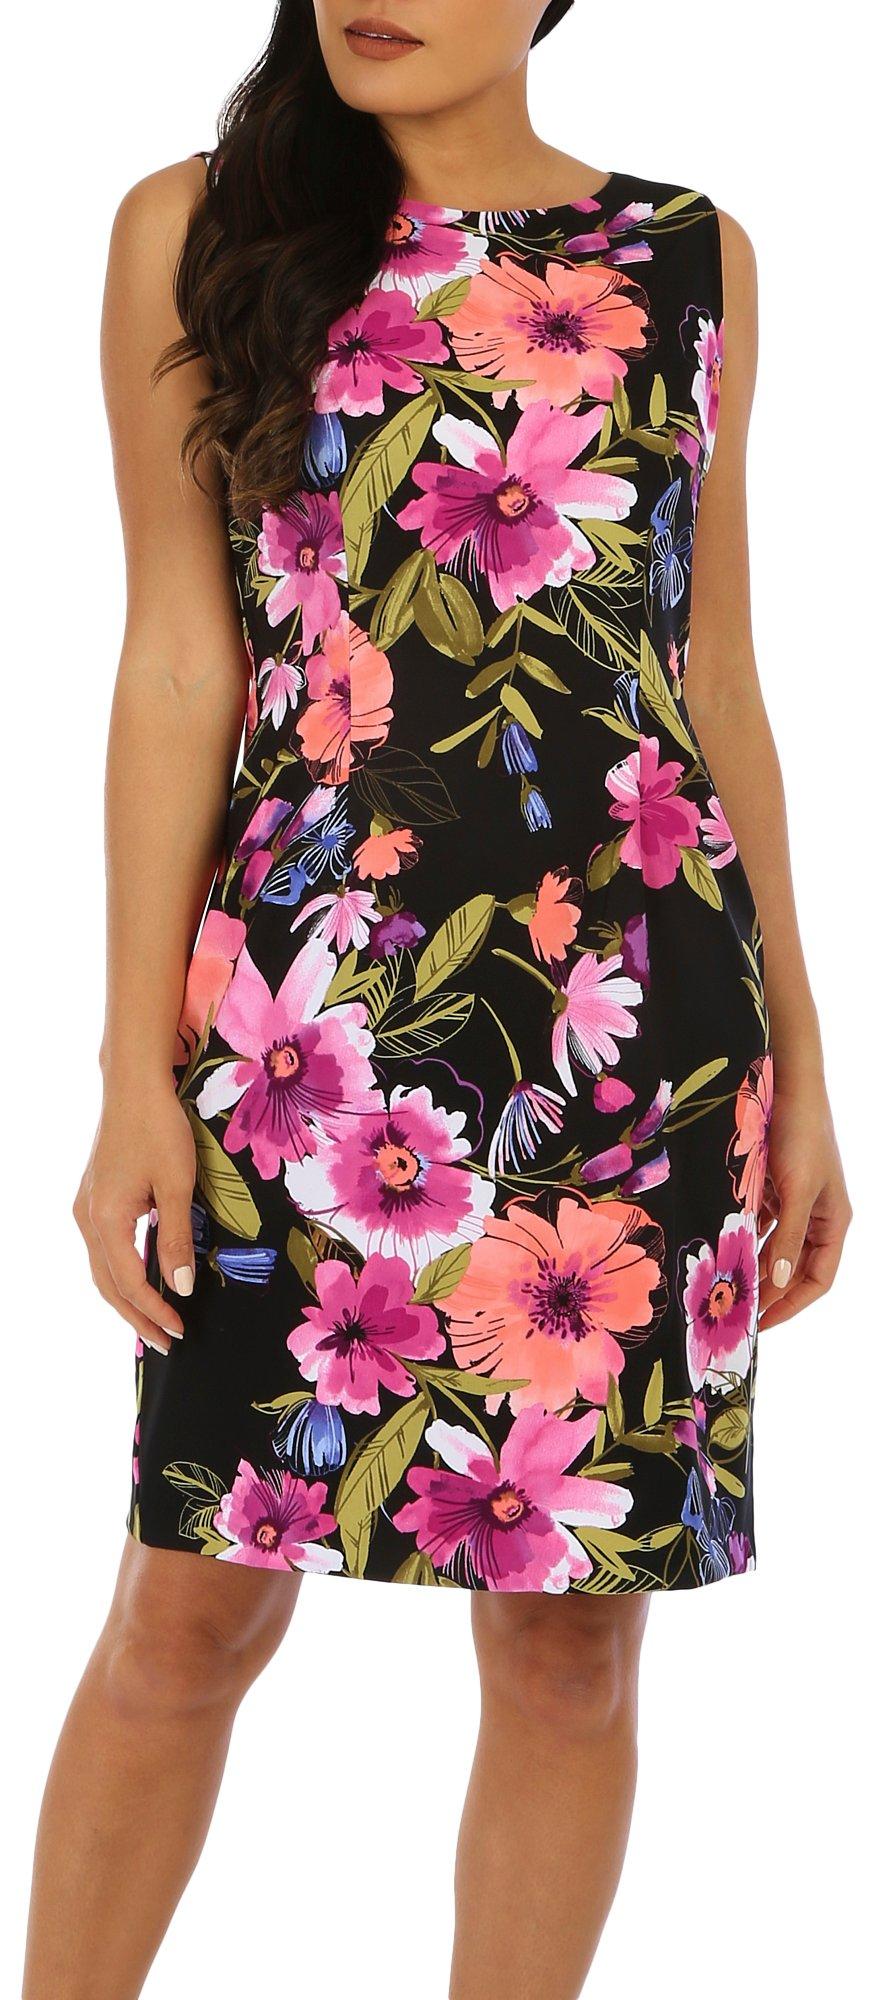 Connected Apparel Womens Floral Sleeveless Dress